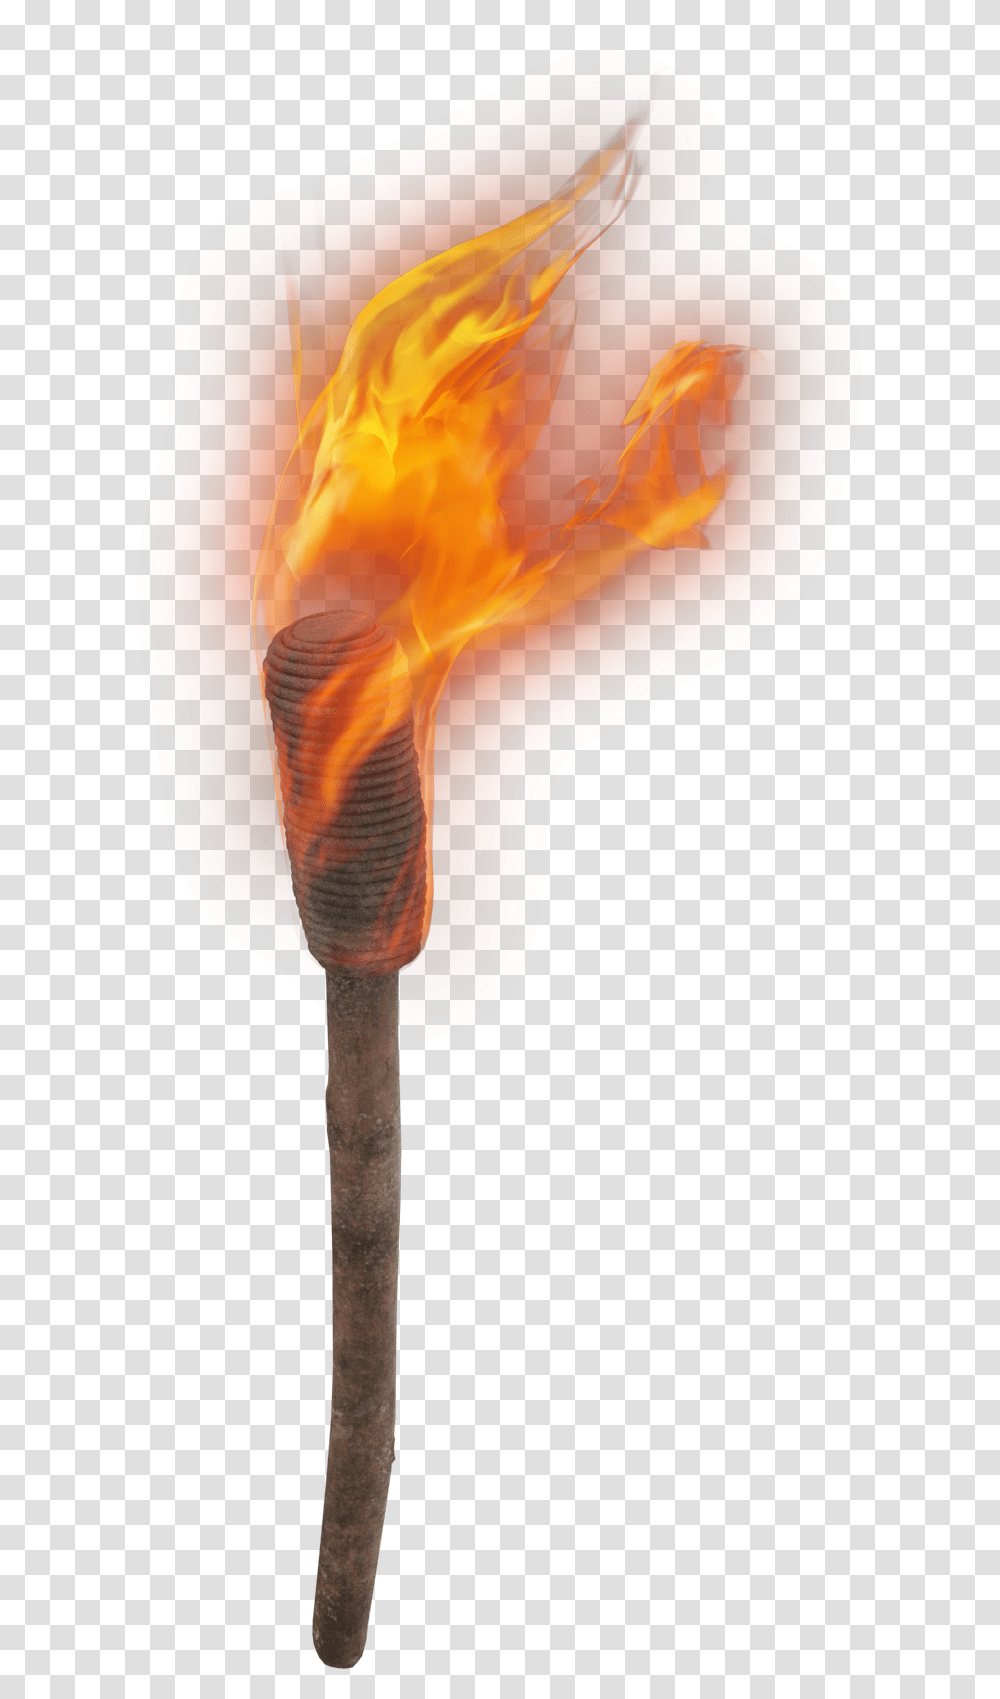 Torch Clipart Medieval Fire Torch Hd Fire Torch, Ornament, Animal, Invertebrate, Flame Transparent Png